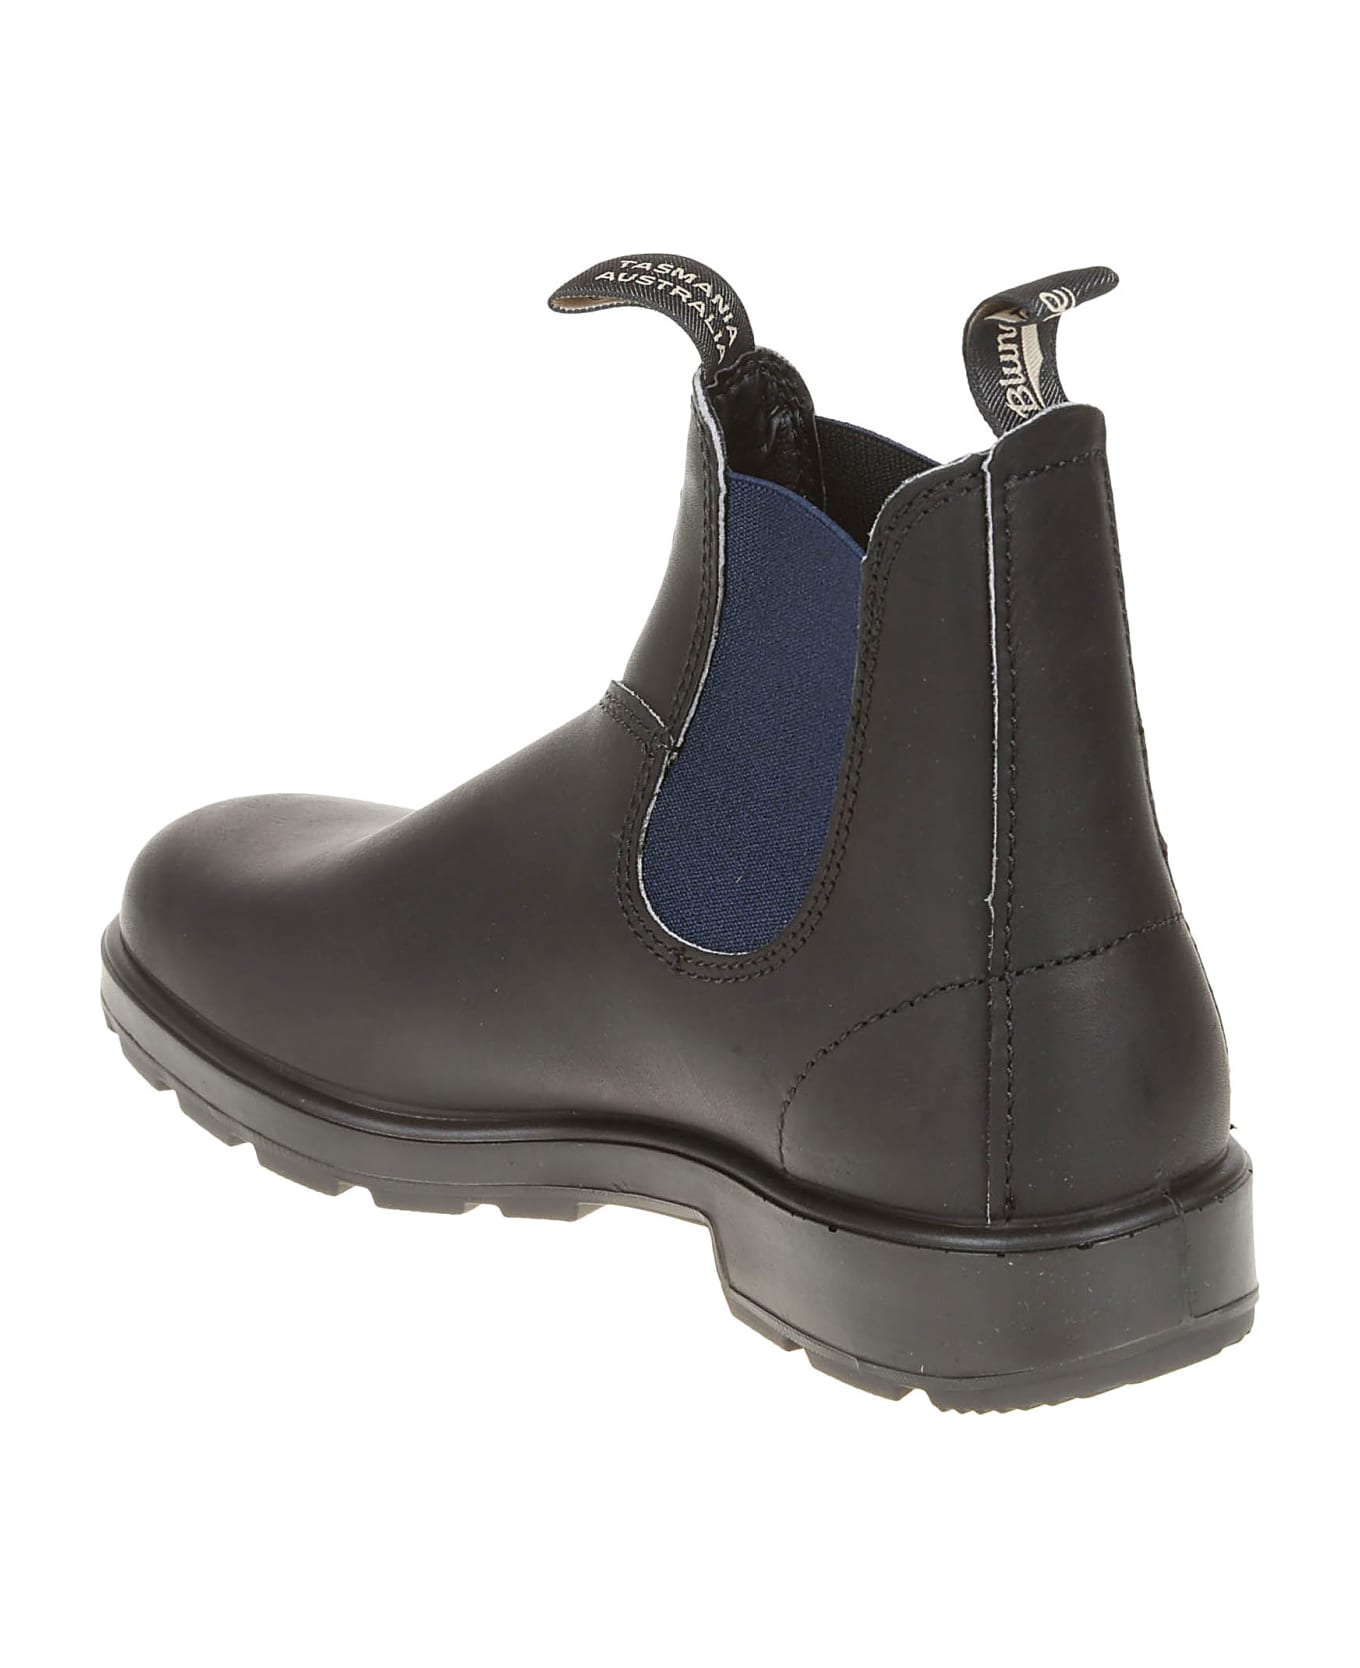 Blundstone Colored Elastic Sided Boots - Black/Navy ブーツ